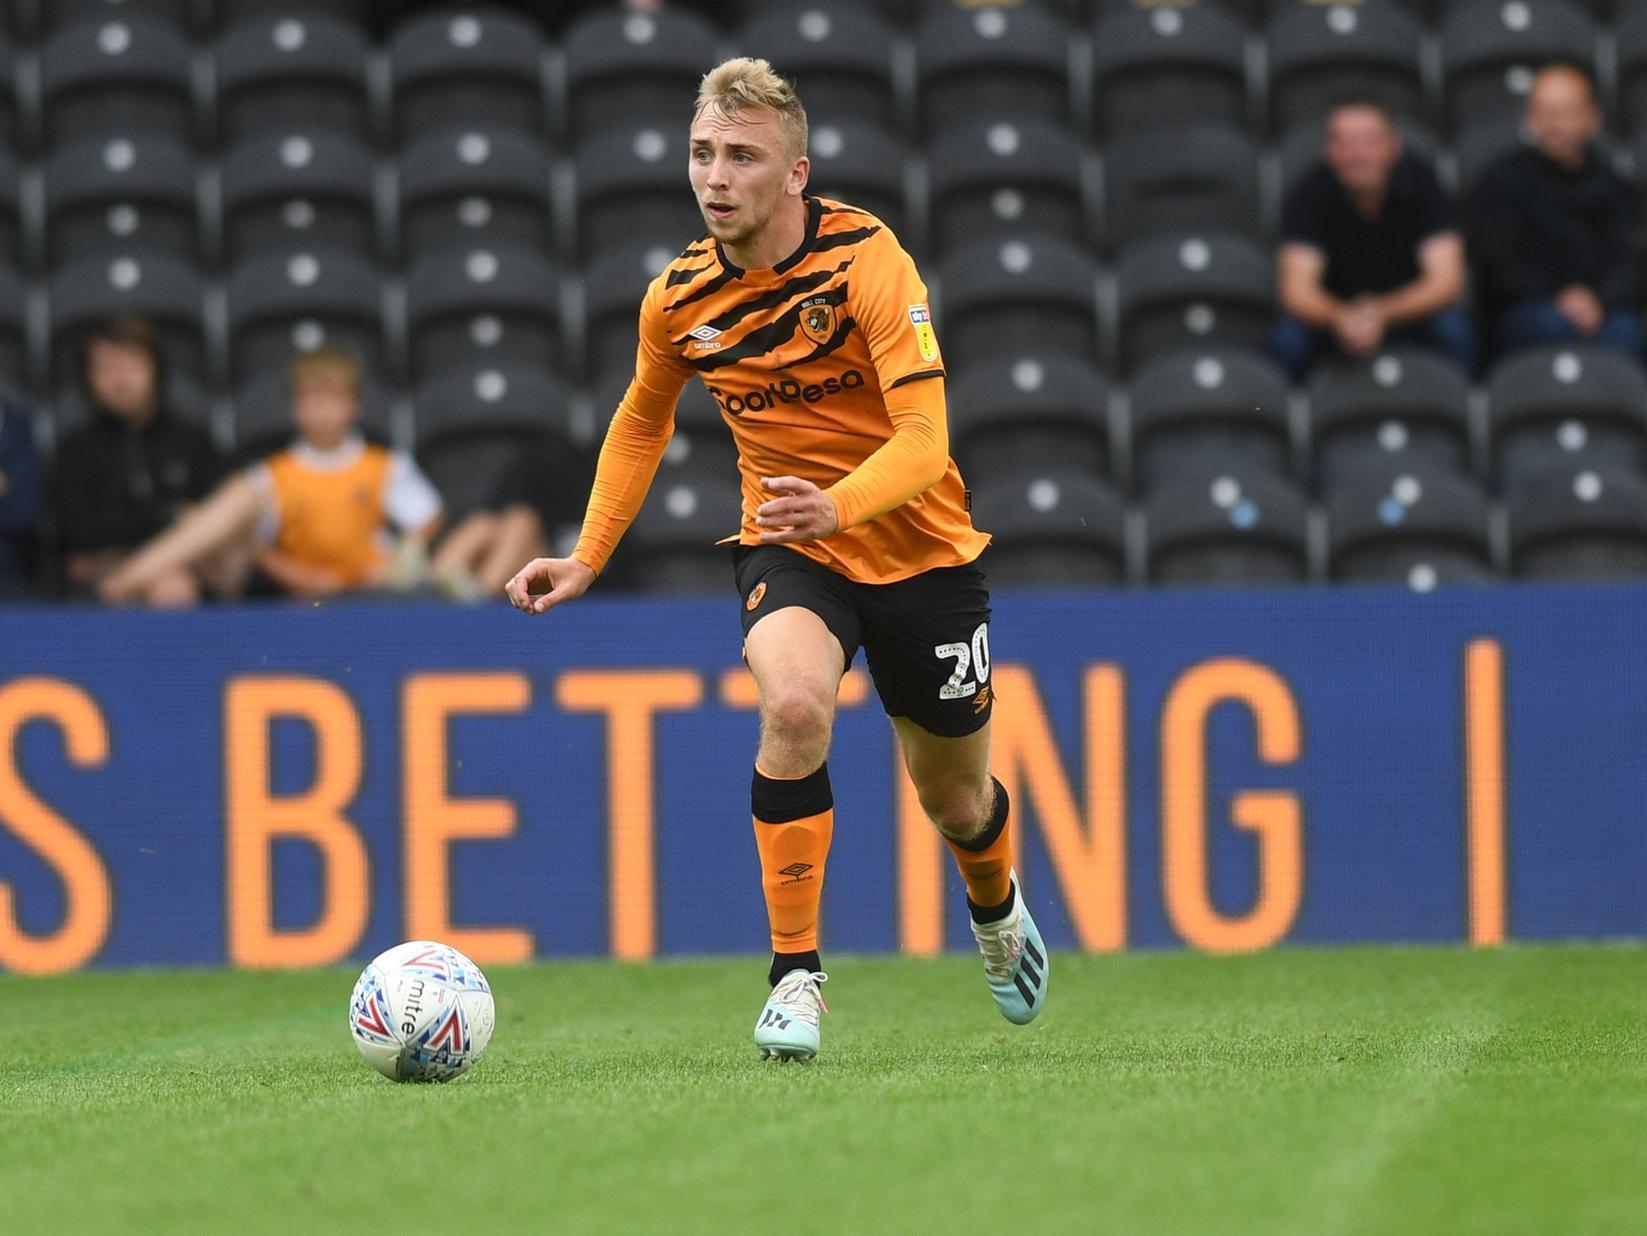 Hull City's 22-year-old forward/winger makes the XI on the right flank with an average rating of 7.3. Photo by Jonathan Gawthorpe.